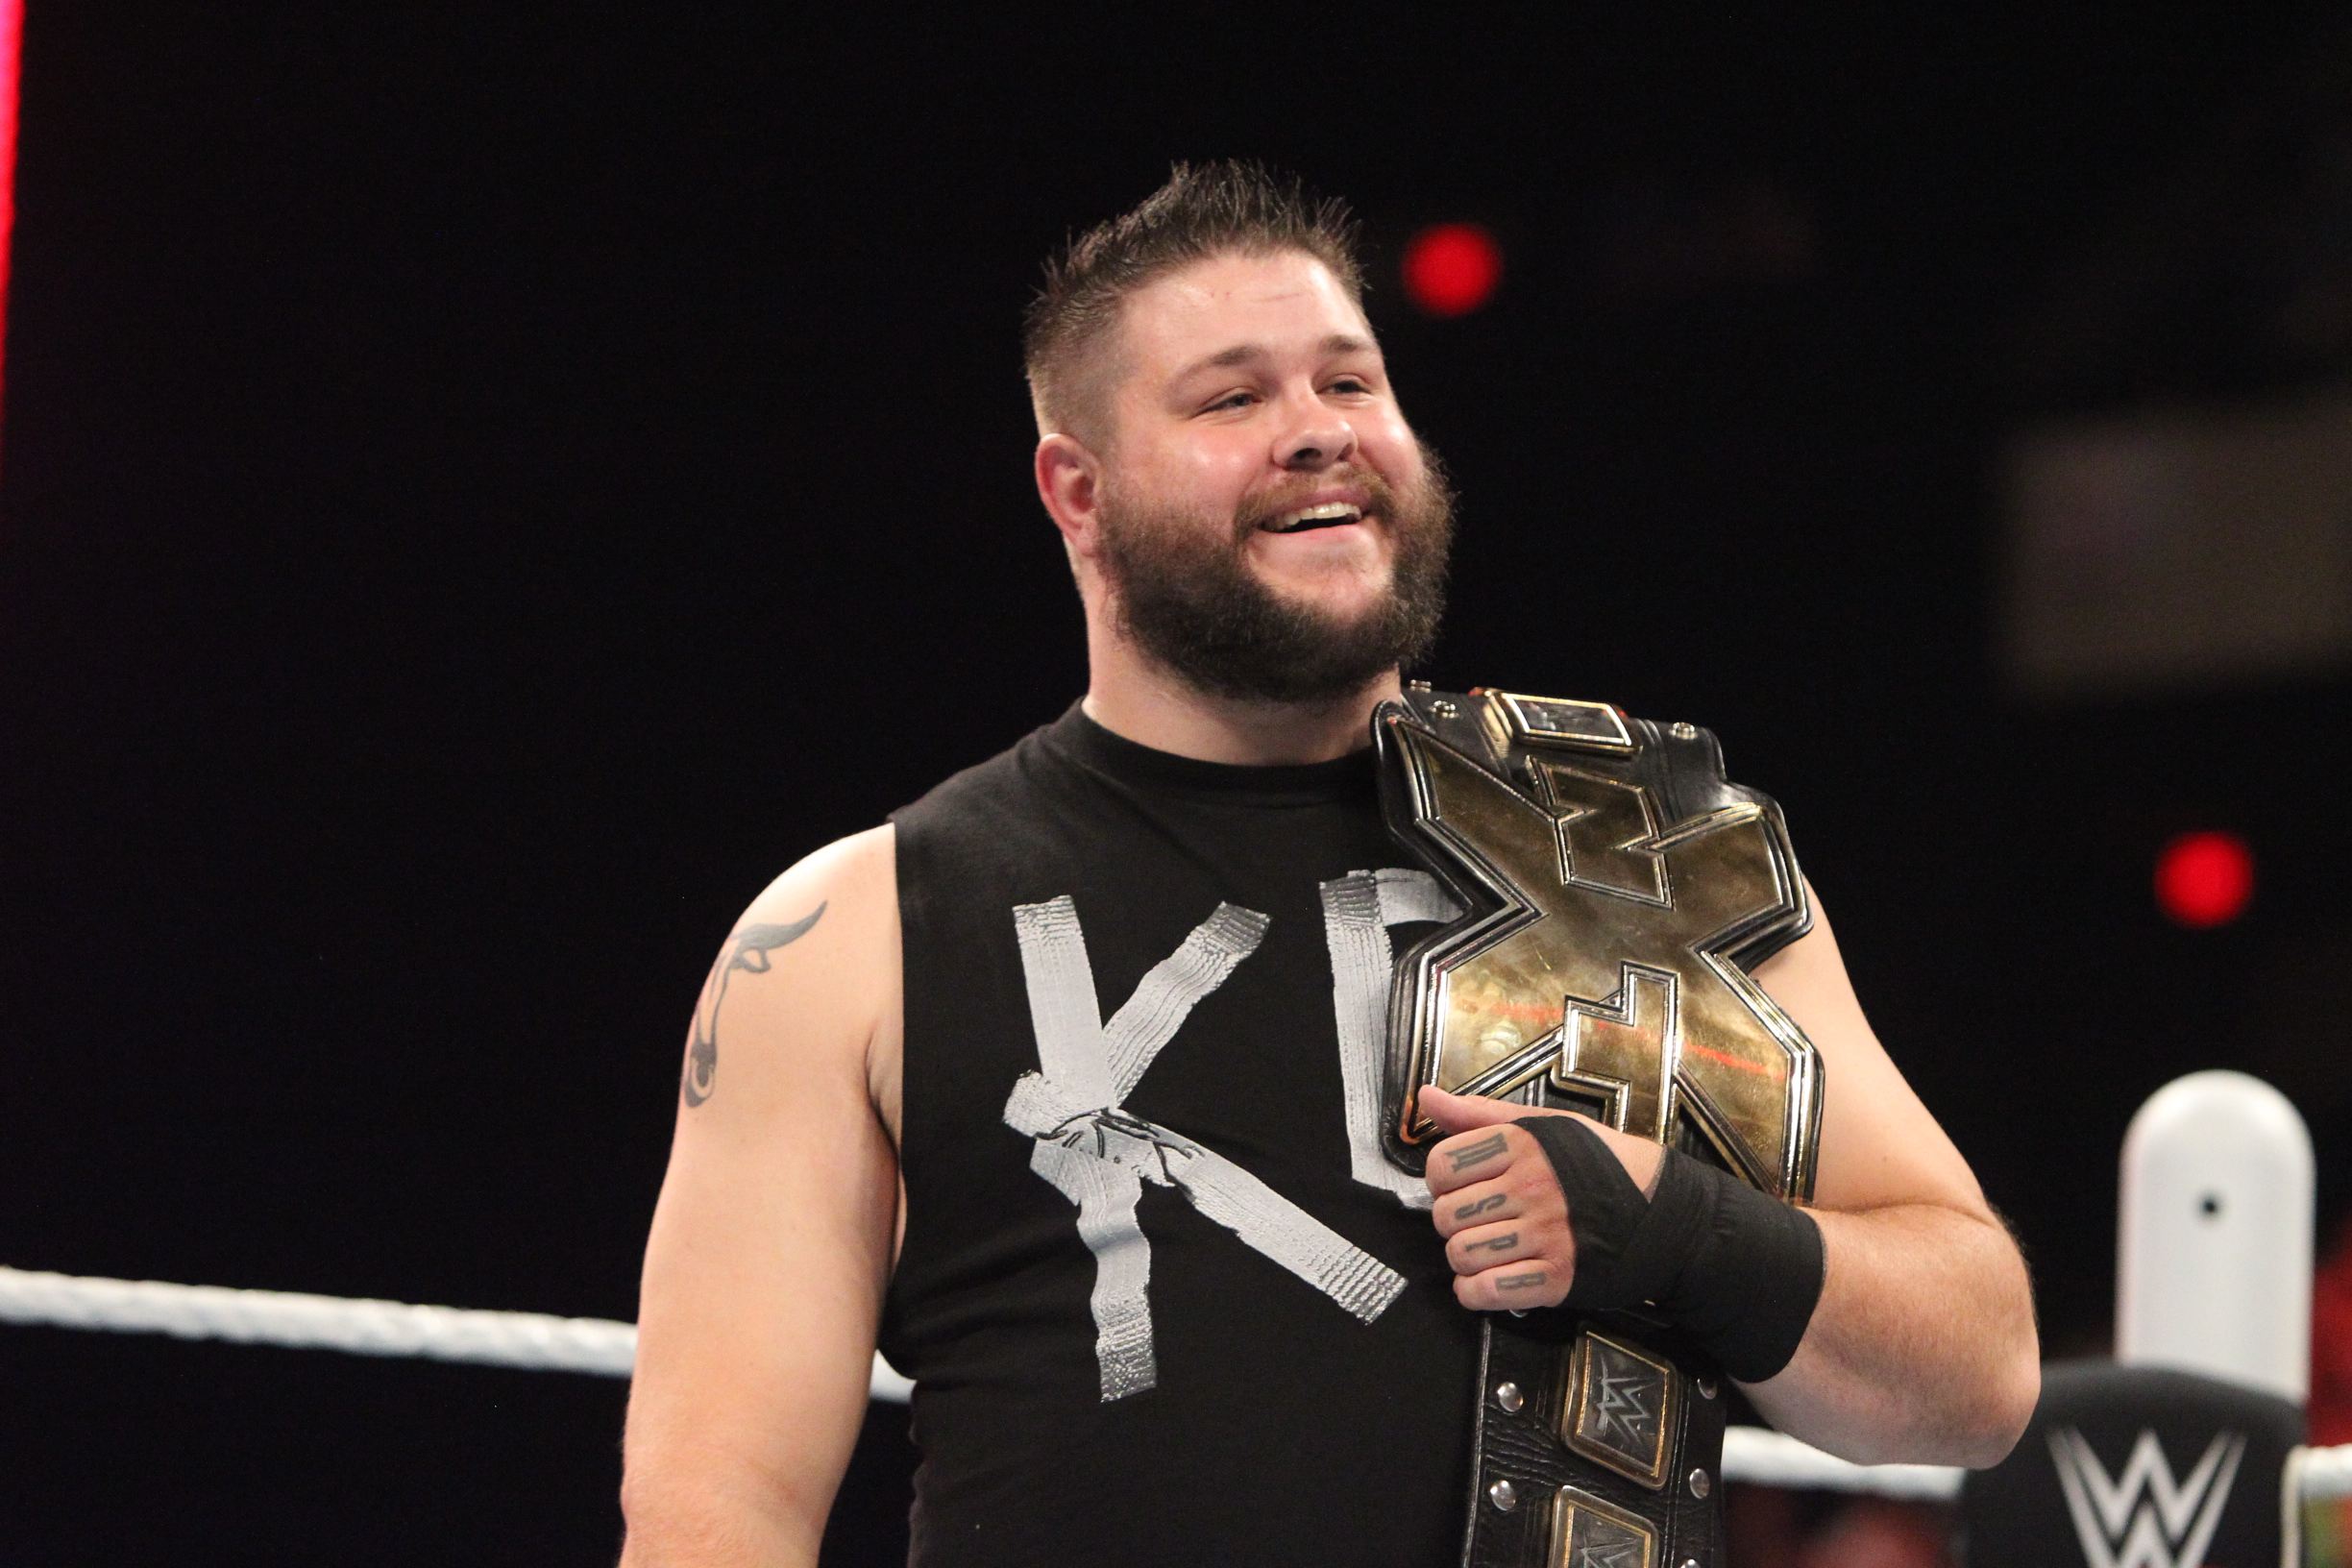 Kevin Owens recalls his transition from NXT to Raw and